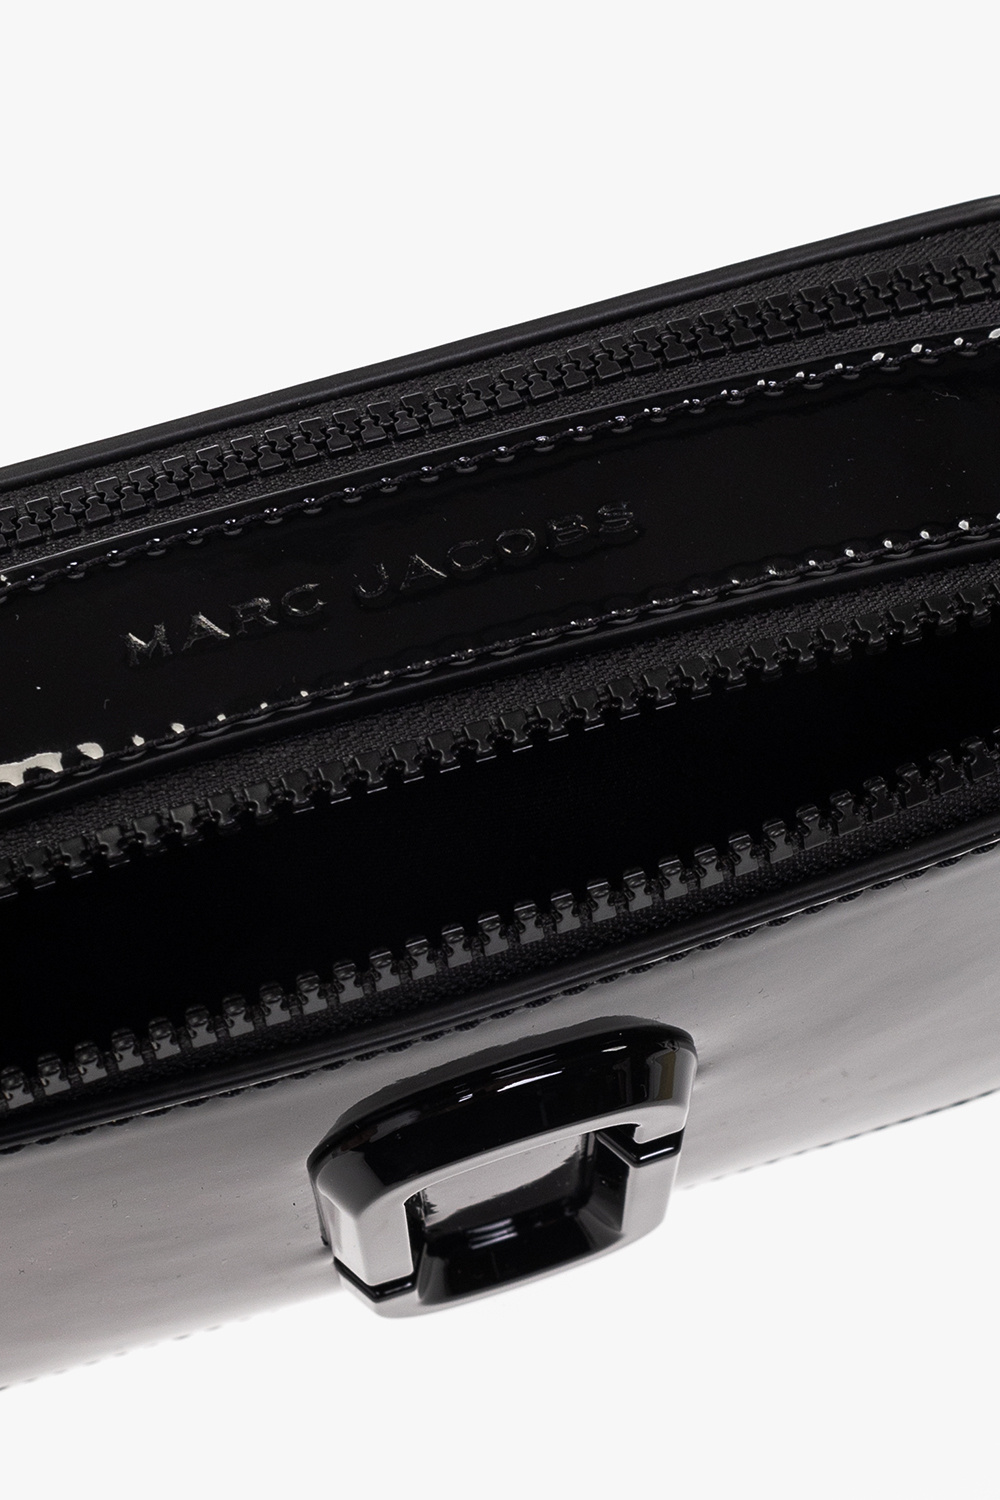 Marc Jacobs The Patent Leather Snapshot in Black